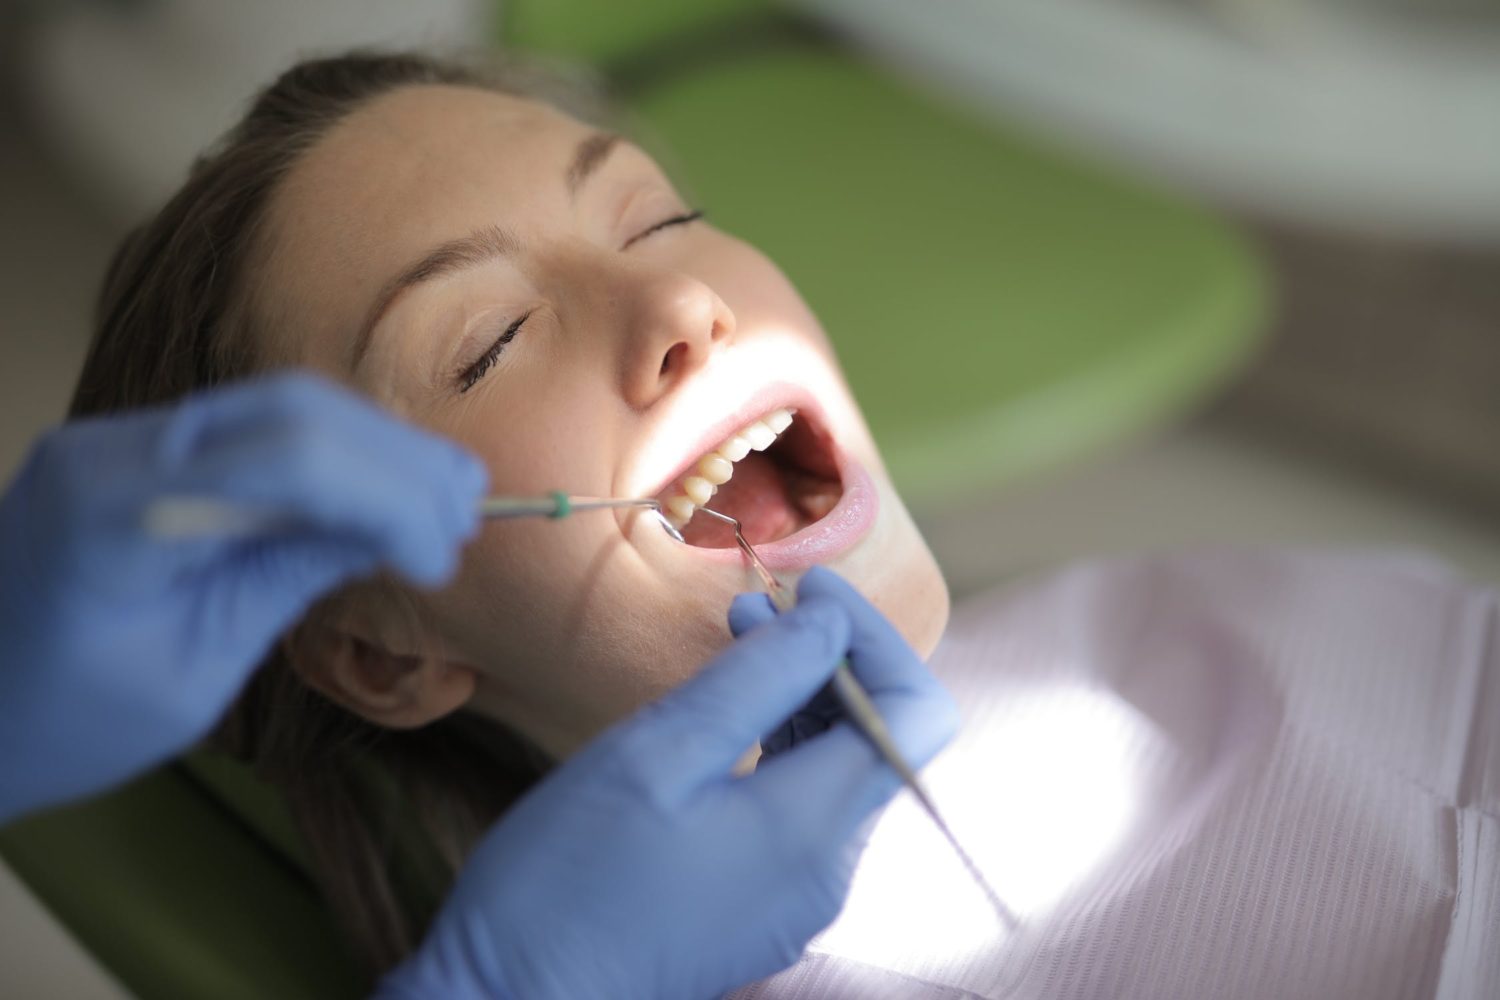 Dentist performing a dental procedure on a patient in scientific dental clinic